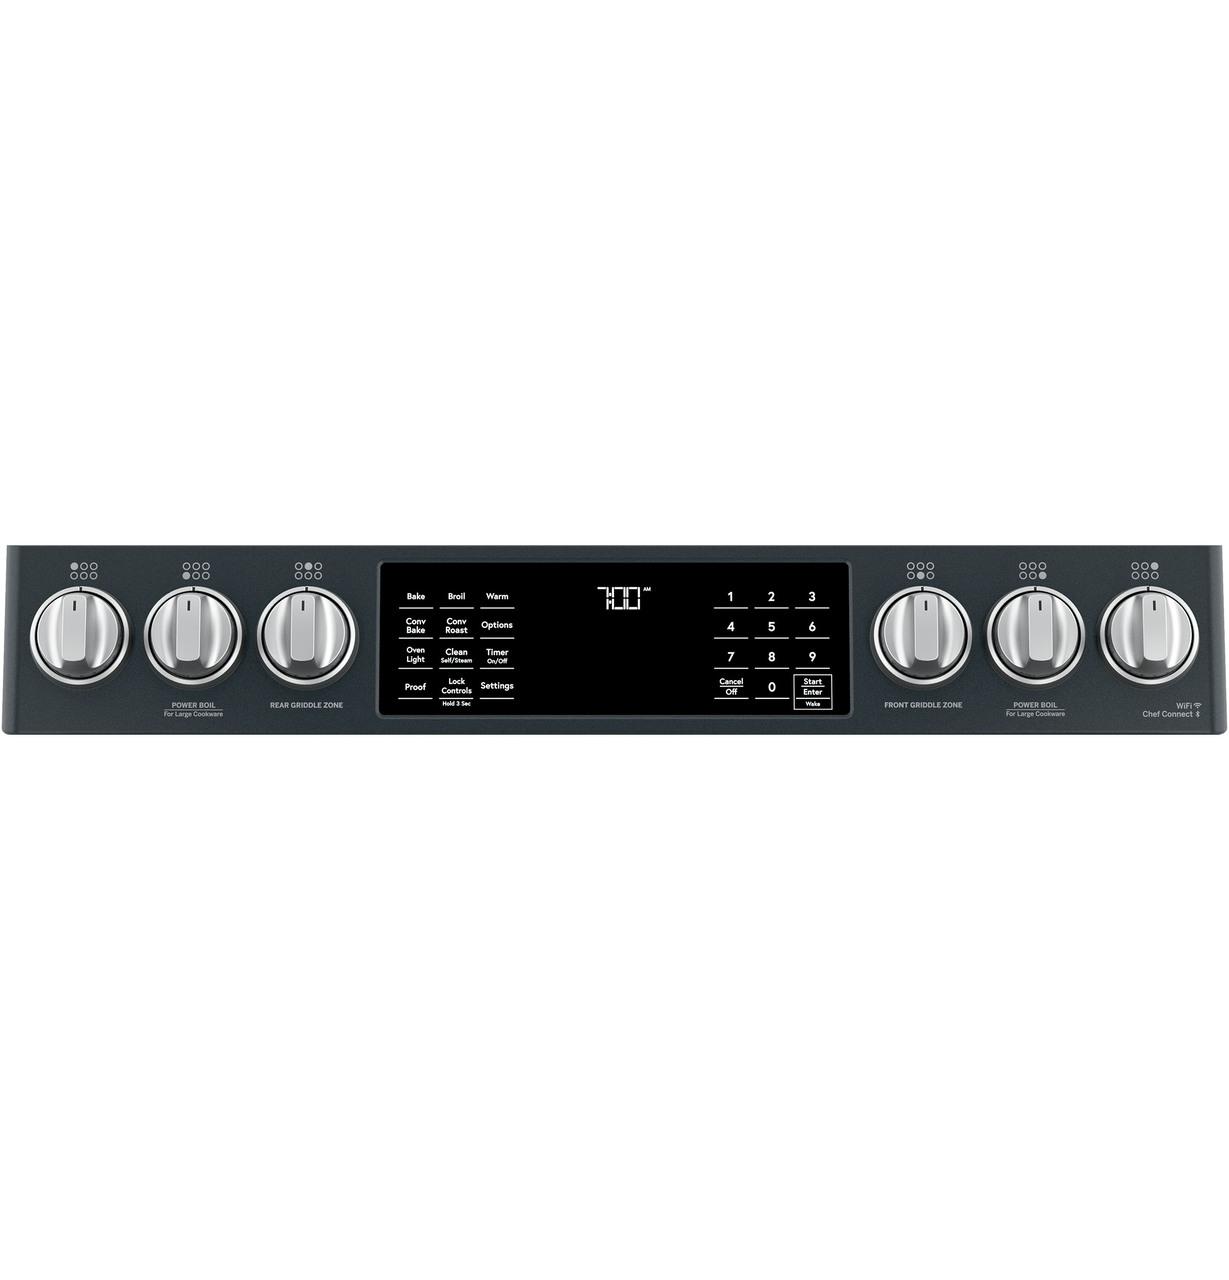 Cafe Caf(eback)™ 30" Smart Slide-In, Front-Control, Gas Range with Convection Oven